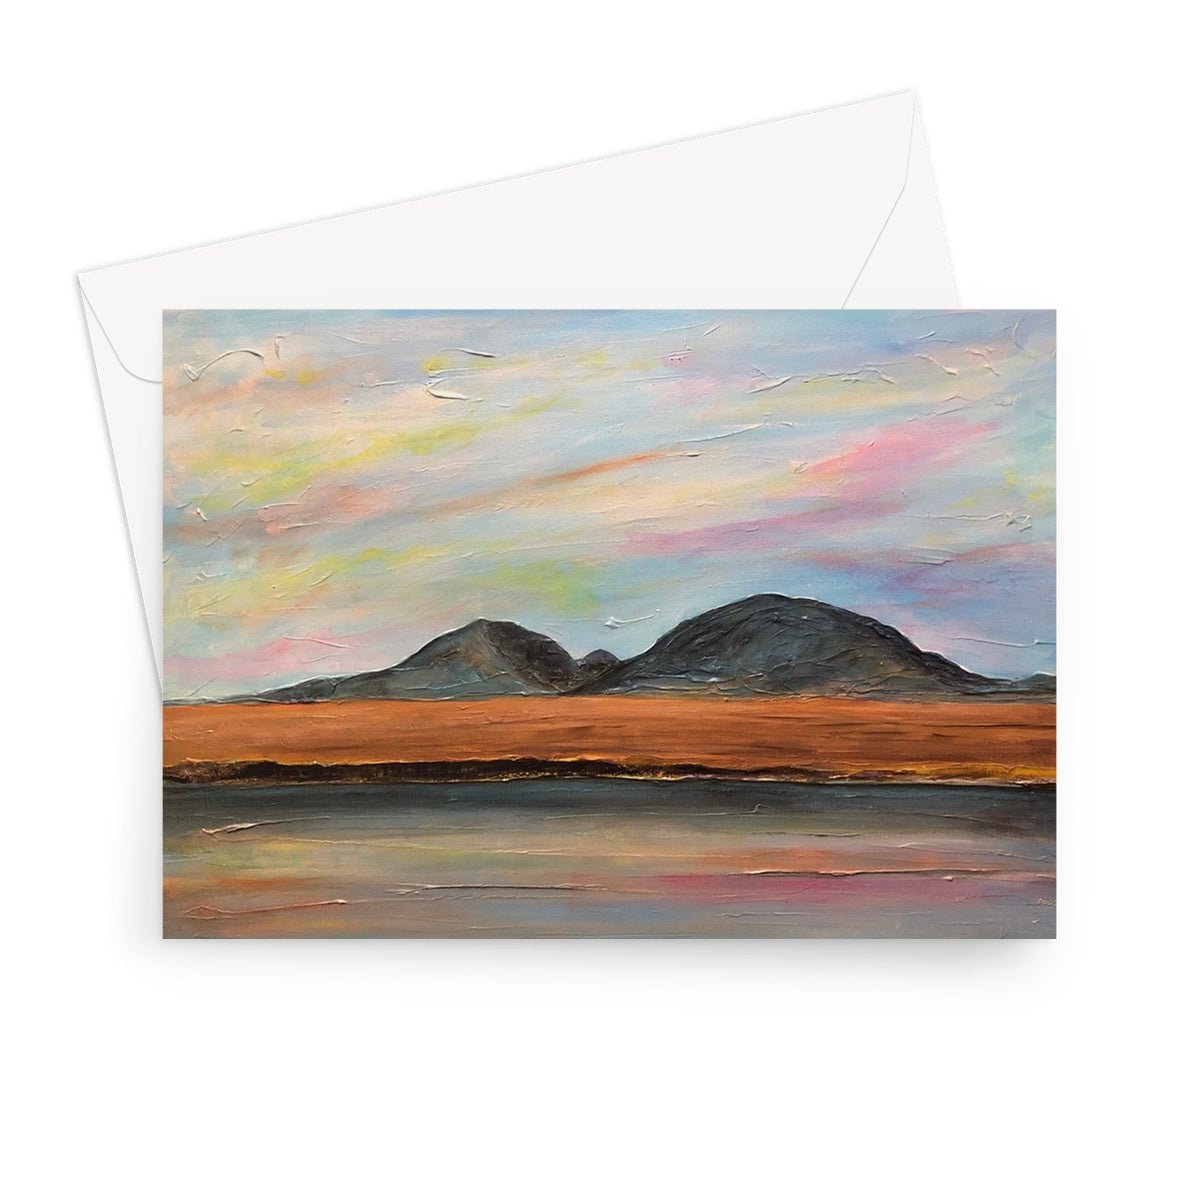 Jura Dawn Art Gifts Greeting Card-Greetings Cards-Hebridean Islands Art Gallery-7"x5"-1 Card-Paintings, Prints, Homeware, Art Gifts From Scotland By Scottish Artist Kevin Hunter